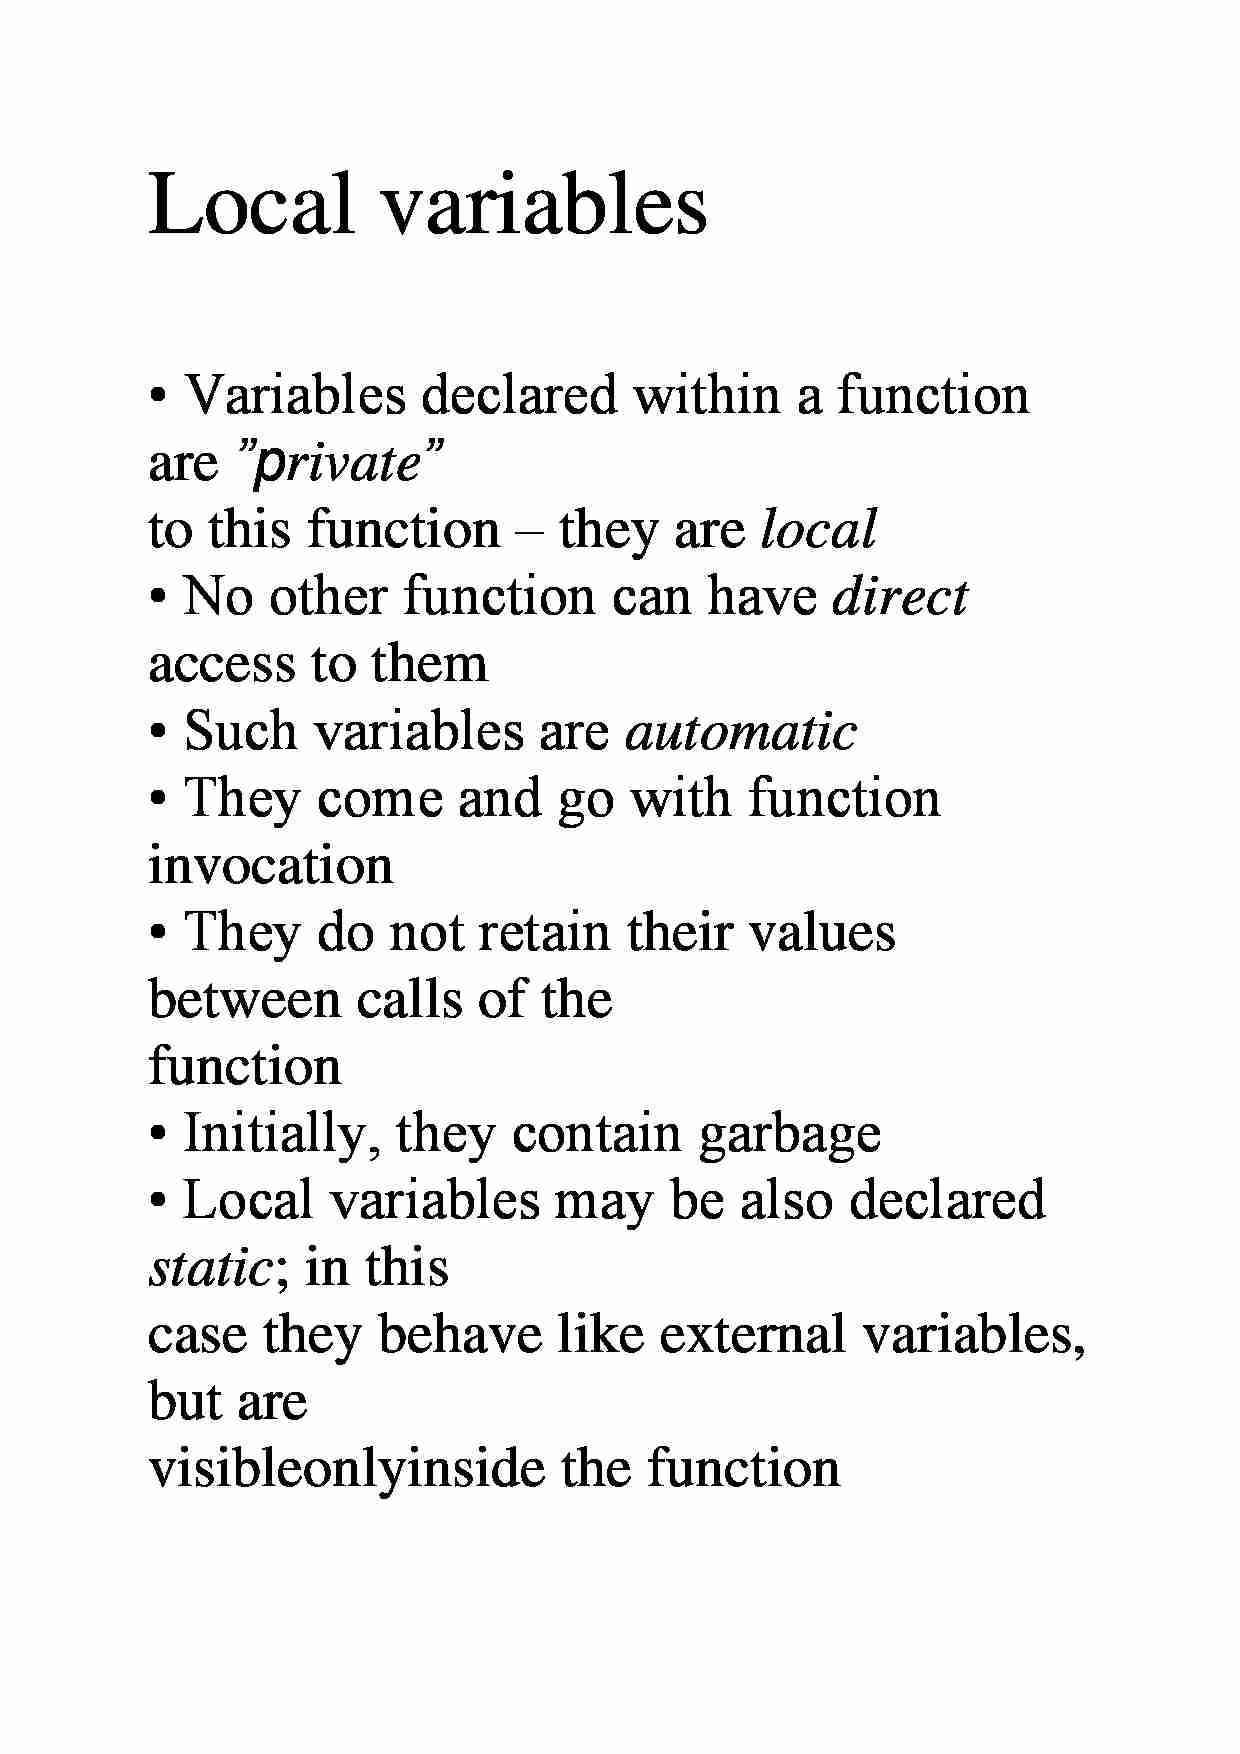 Local variables  - overview - strona 1